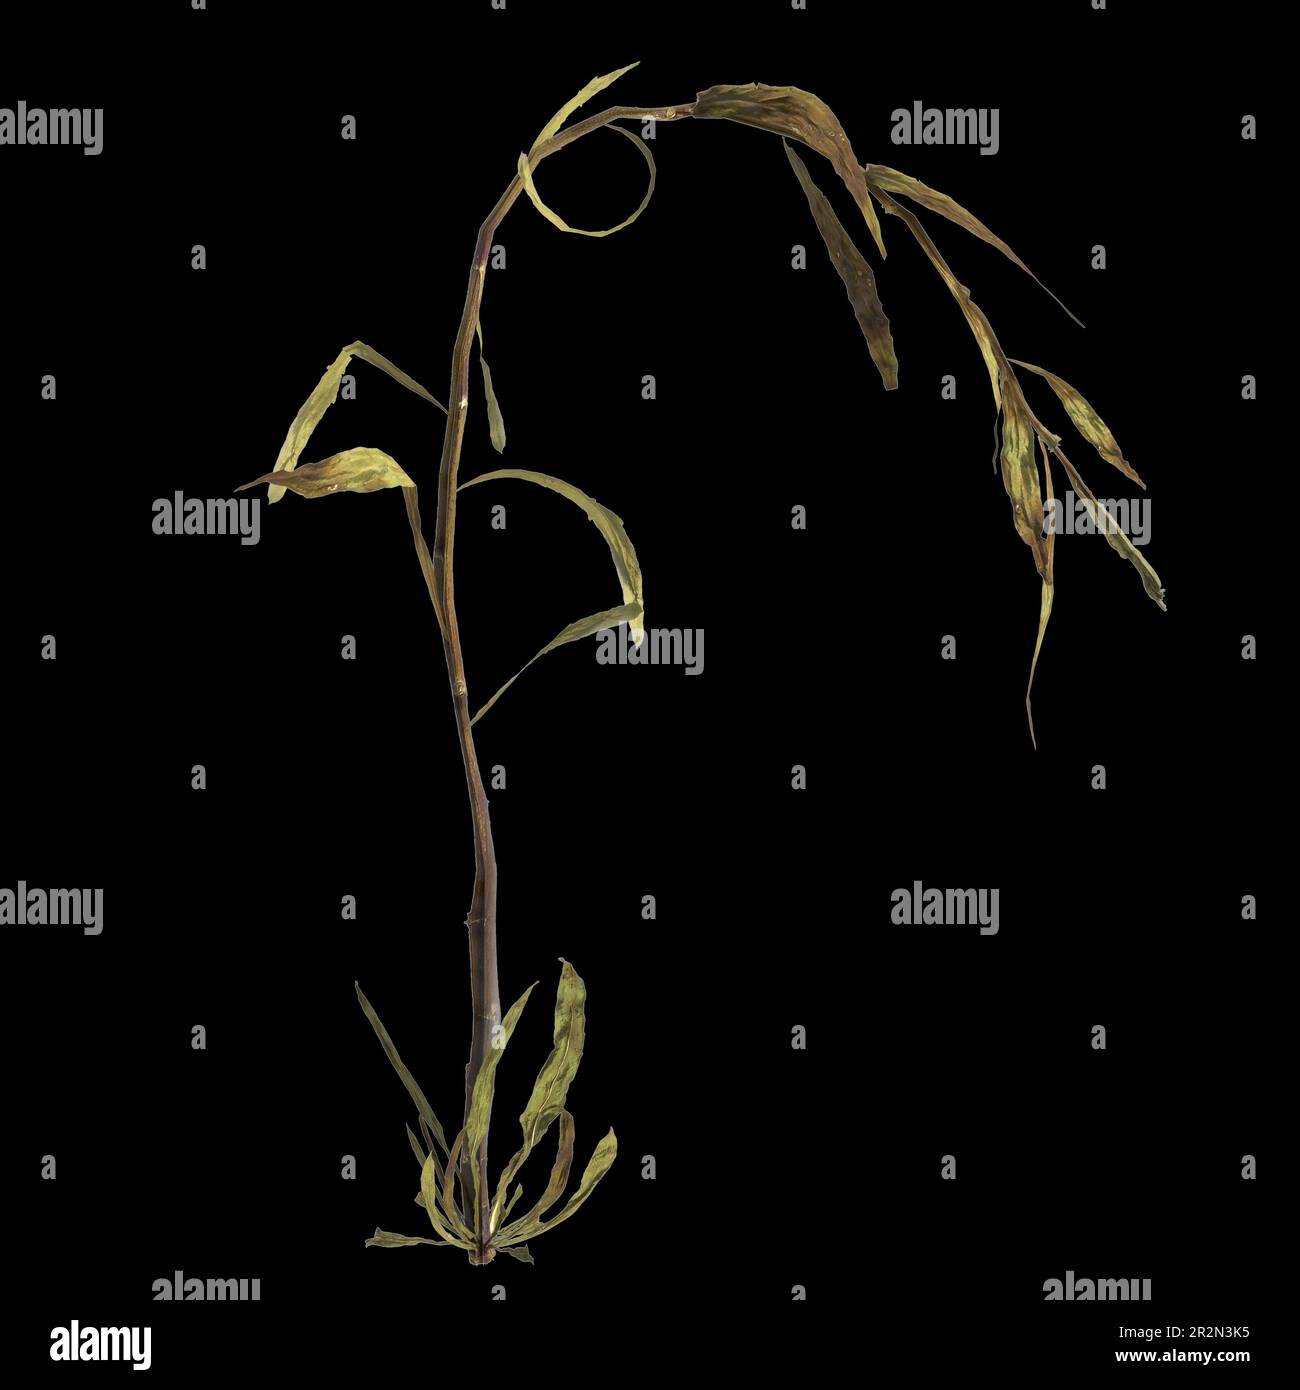 3d illustration of justicia gendarussa plant isolated on black background Stock Photo